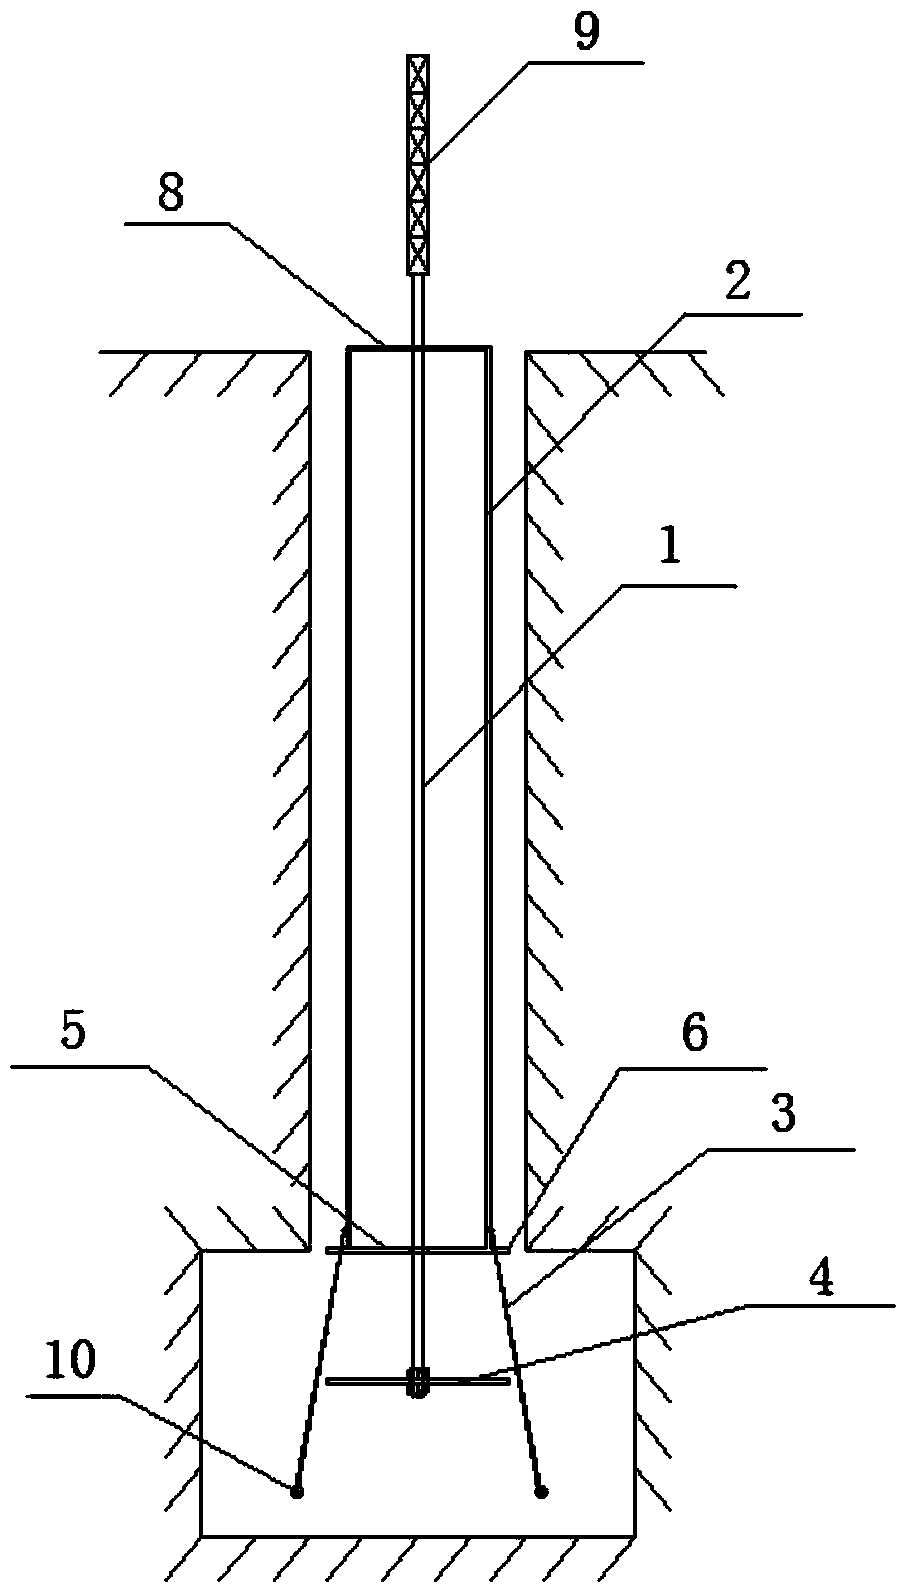 A tension-type enlarged head anchor hole inner diameter measuring device